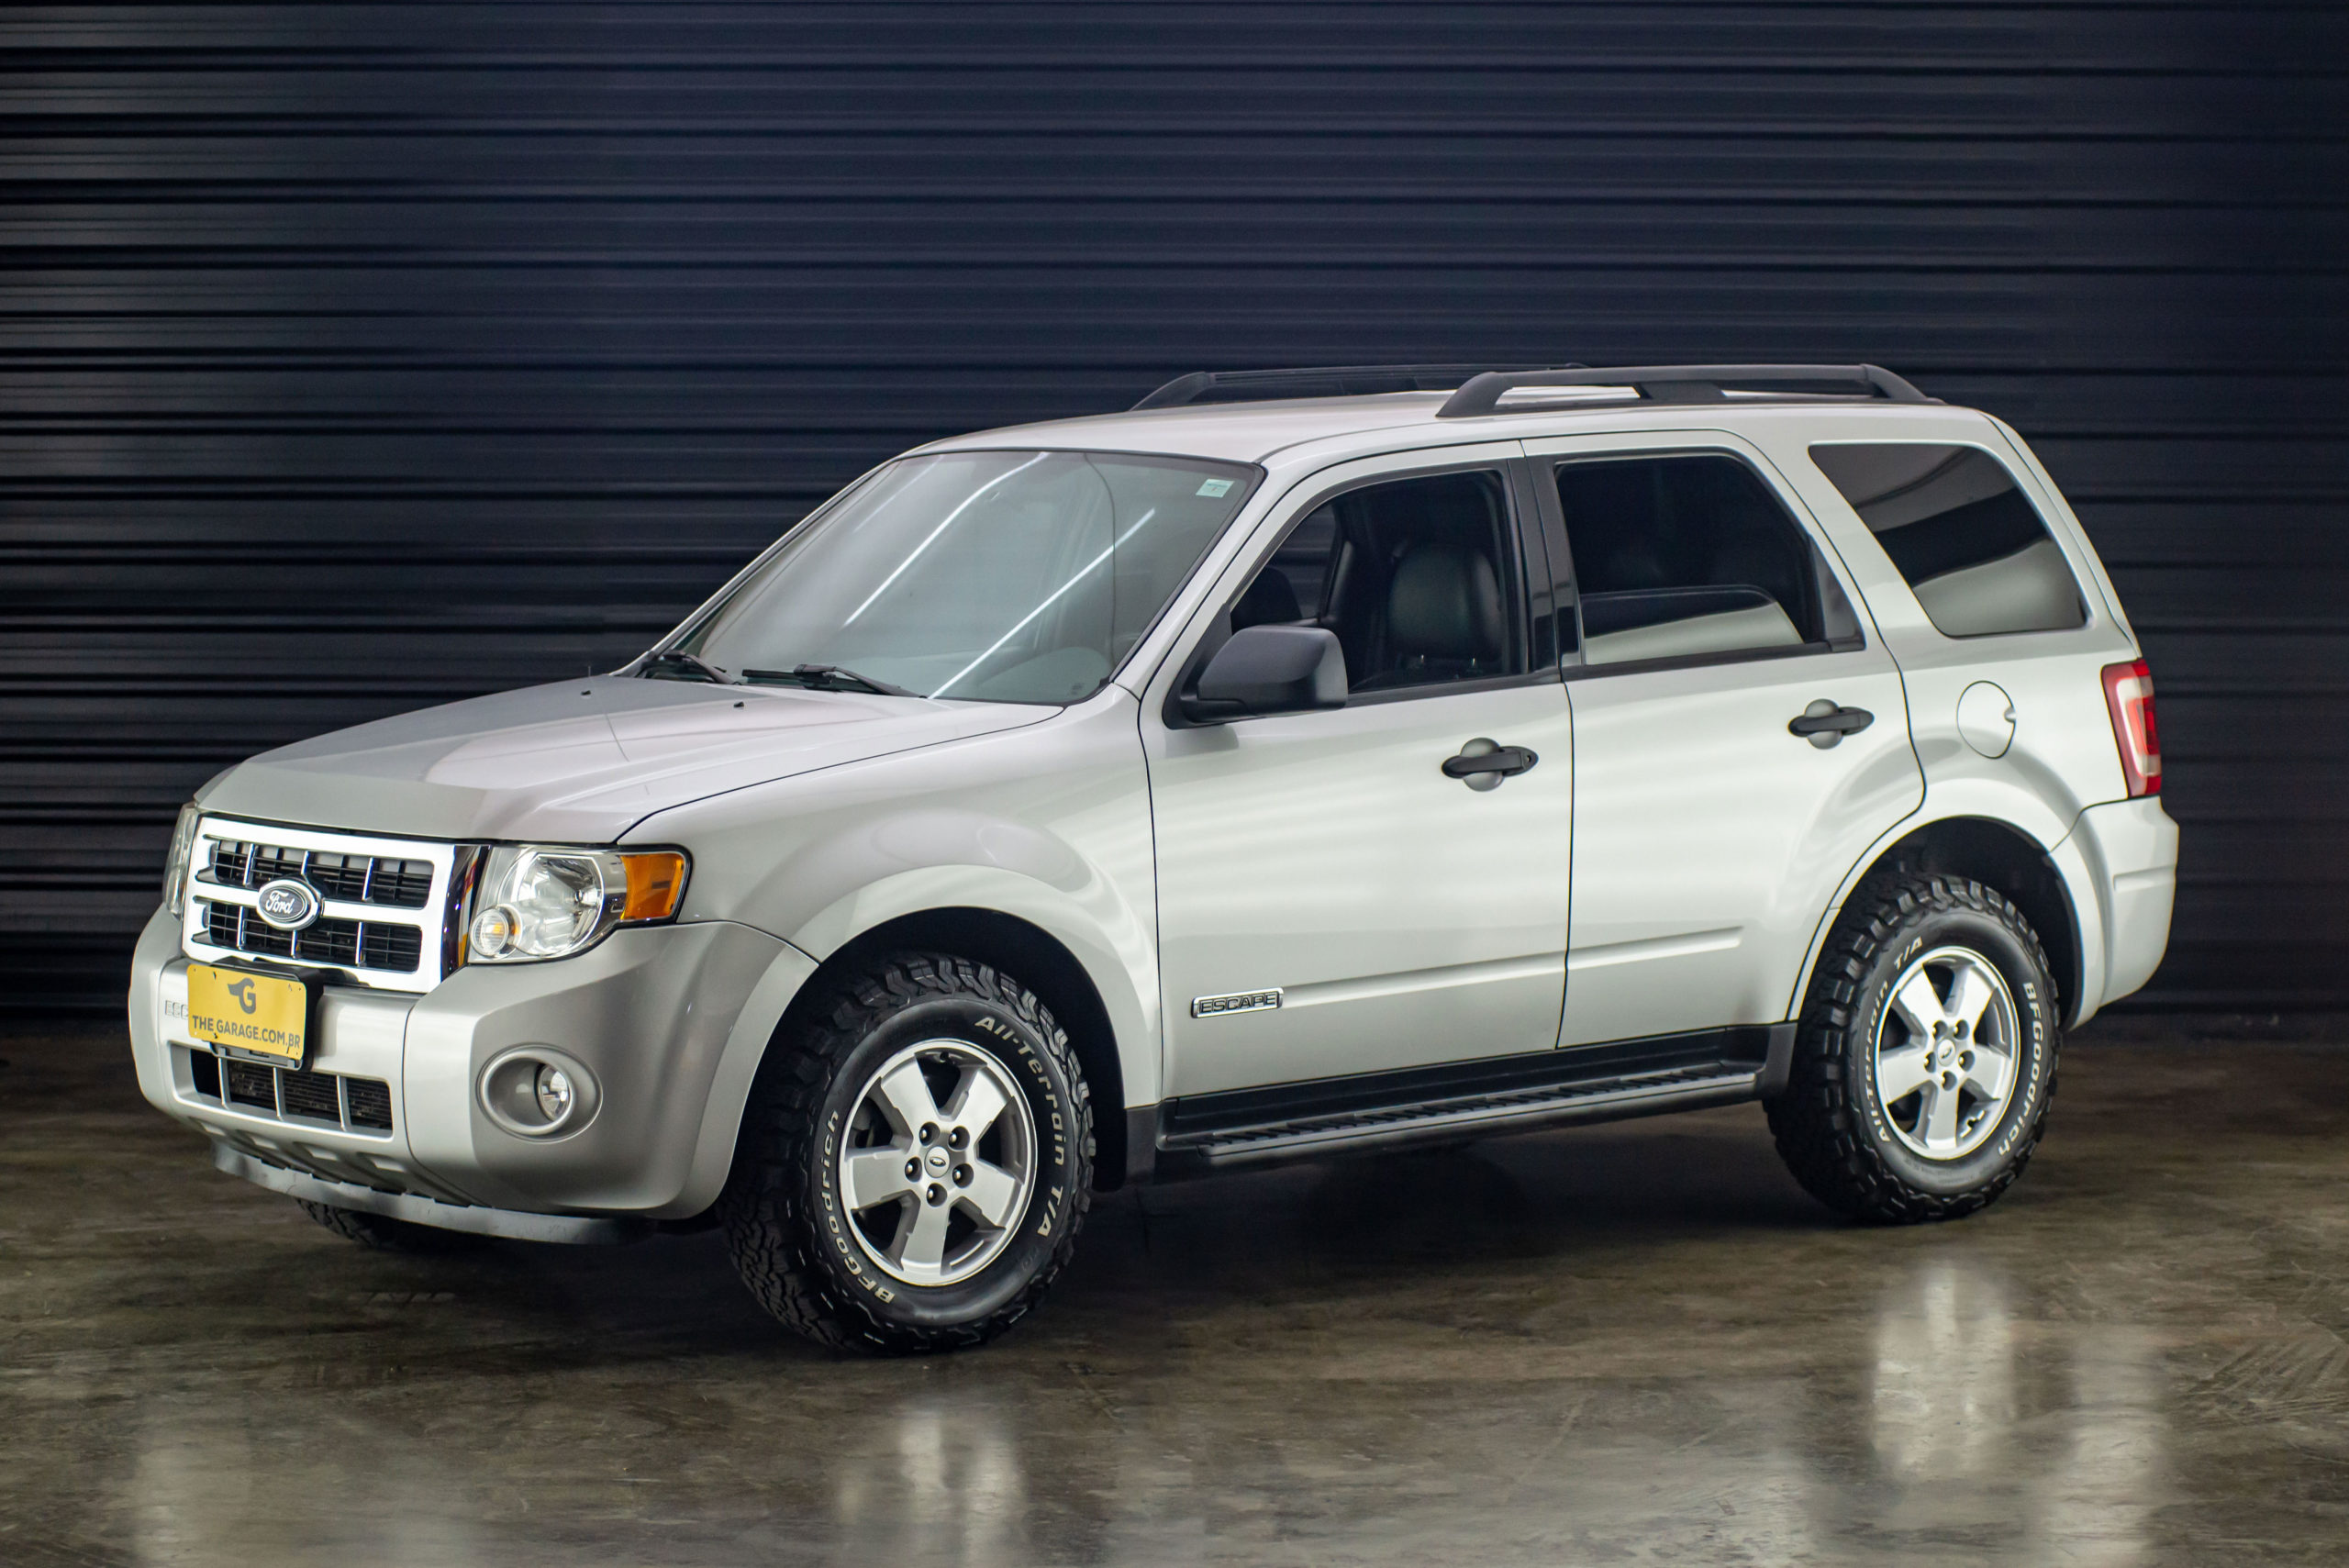 2008 Ford Escape XLT 4X4 - The Garage